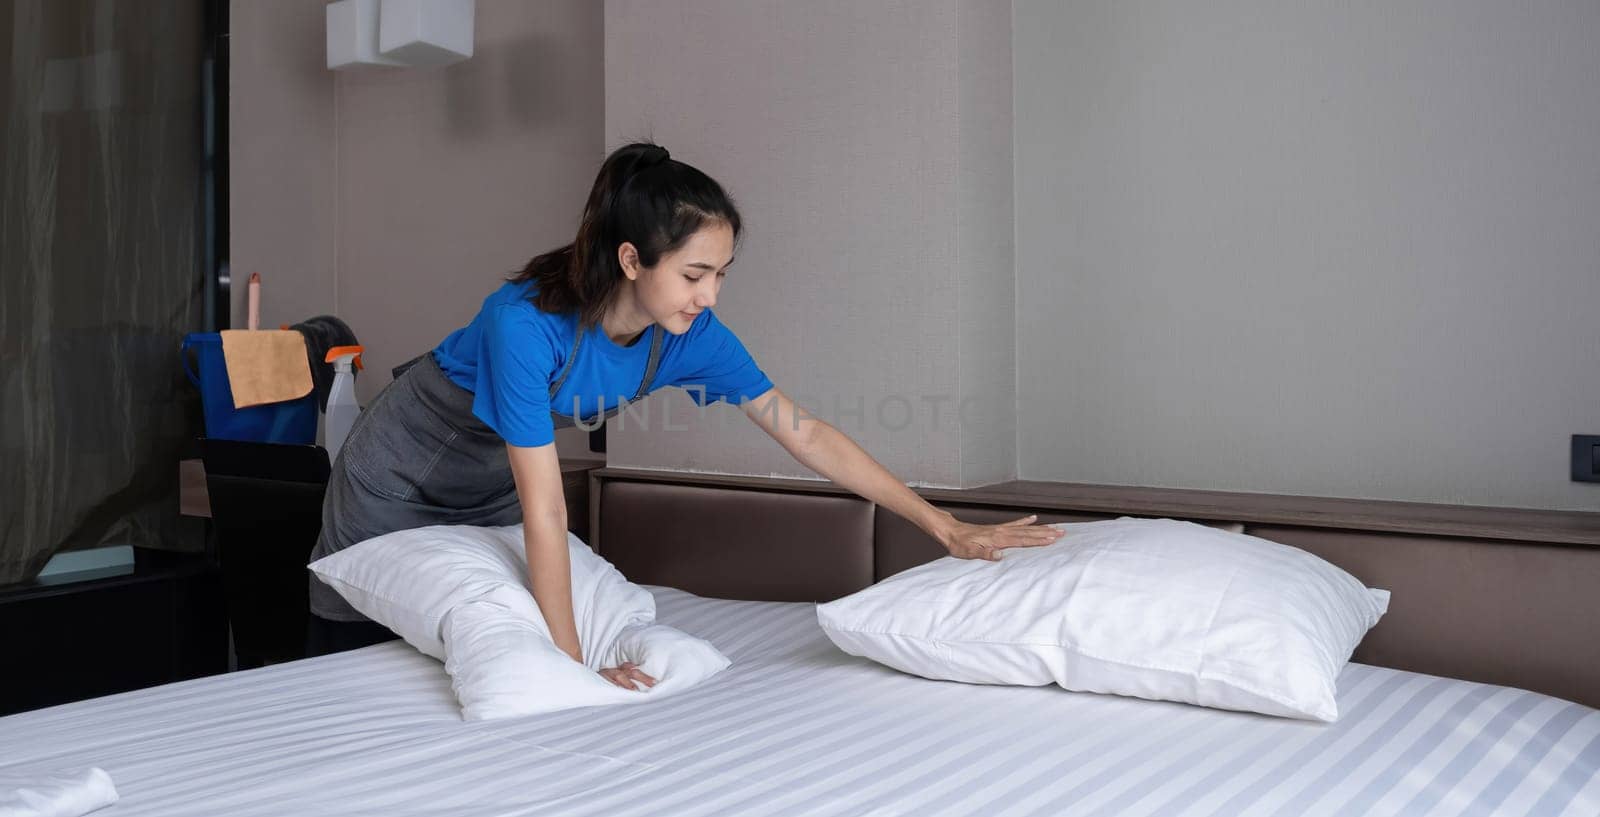 The hotel housekeeper in the room was cleaning the bed and preparing the bedding. by wichayada